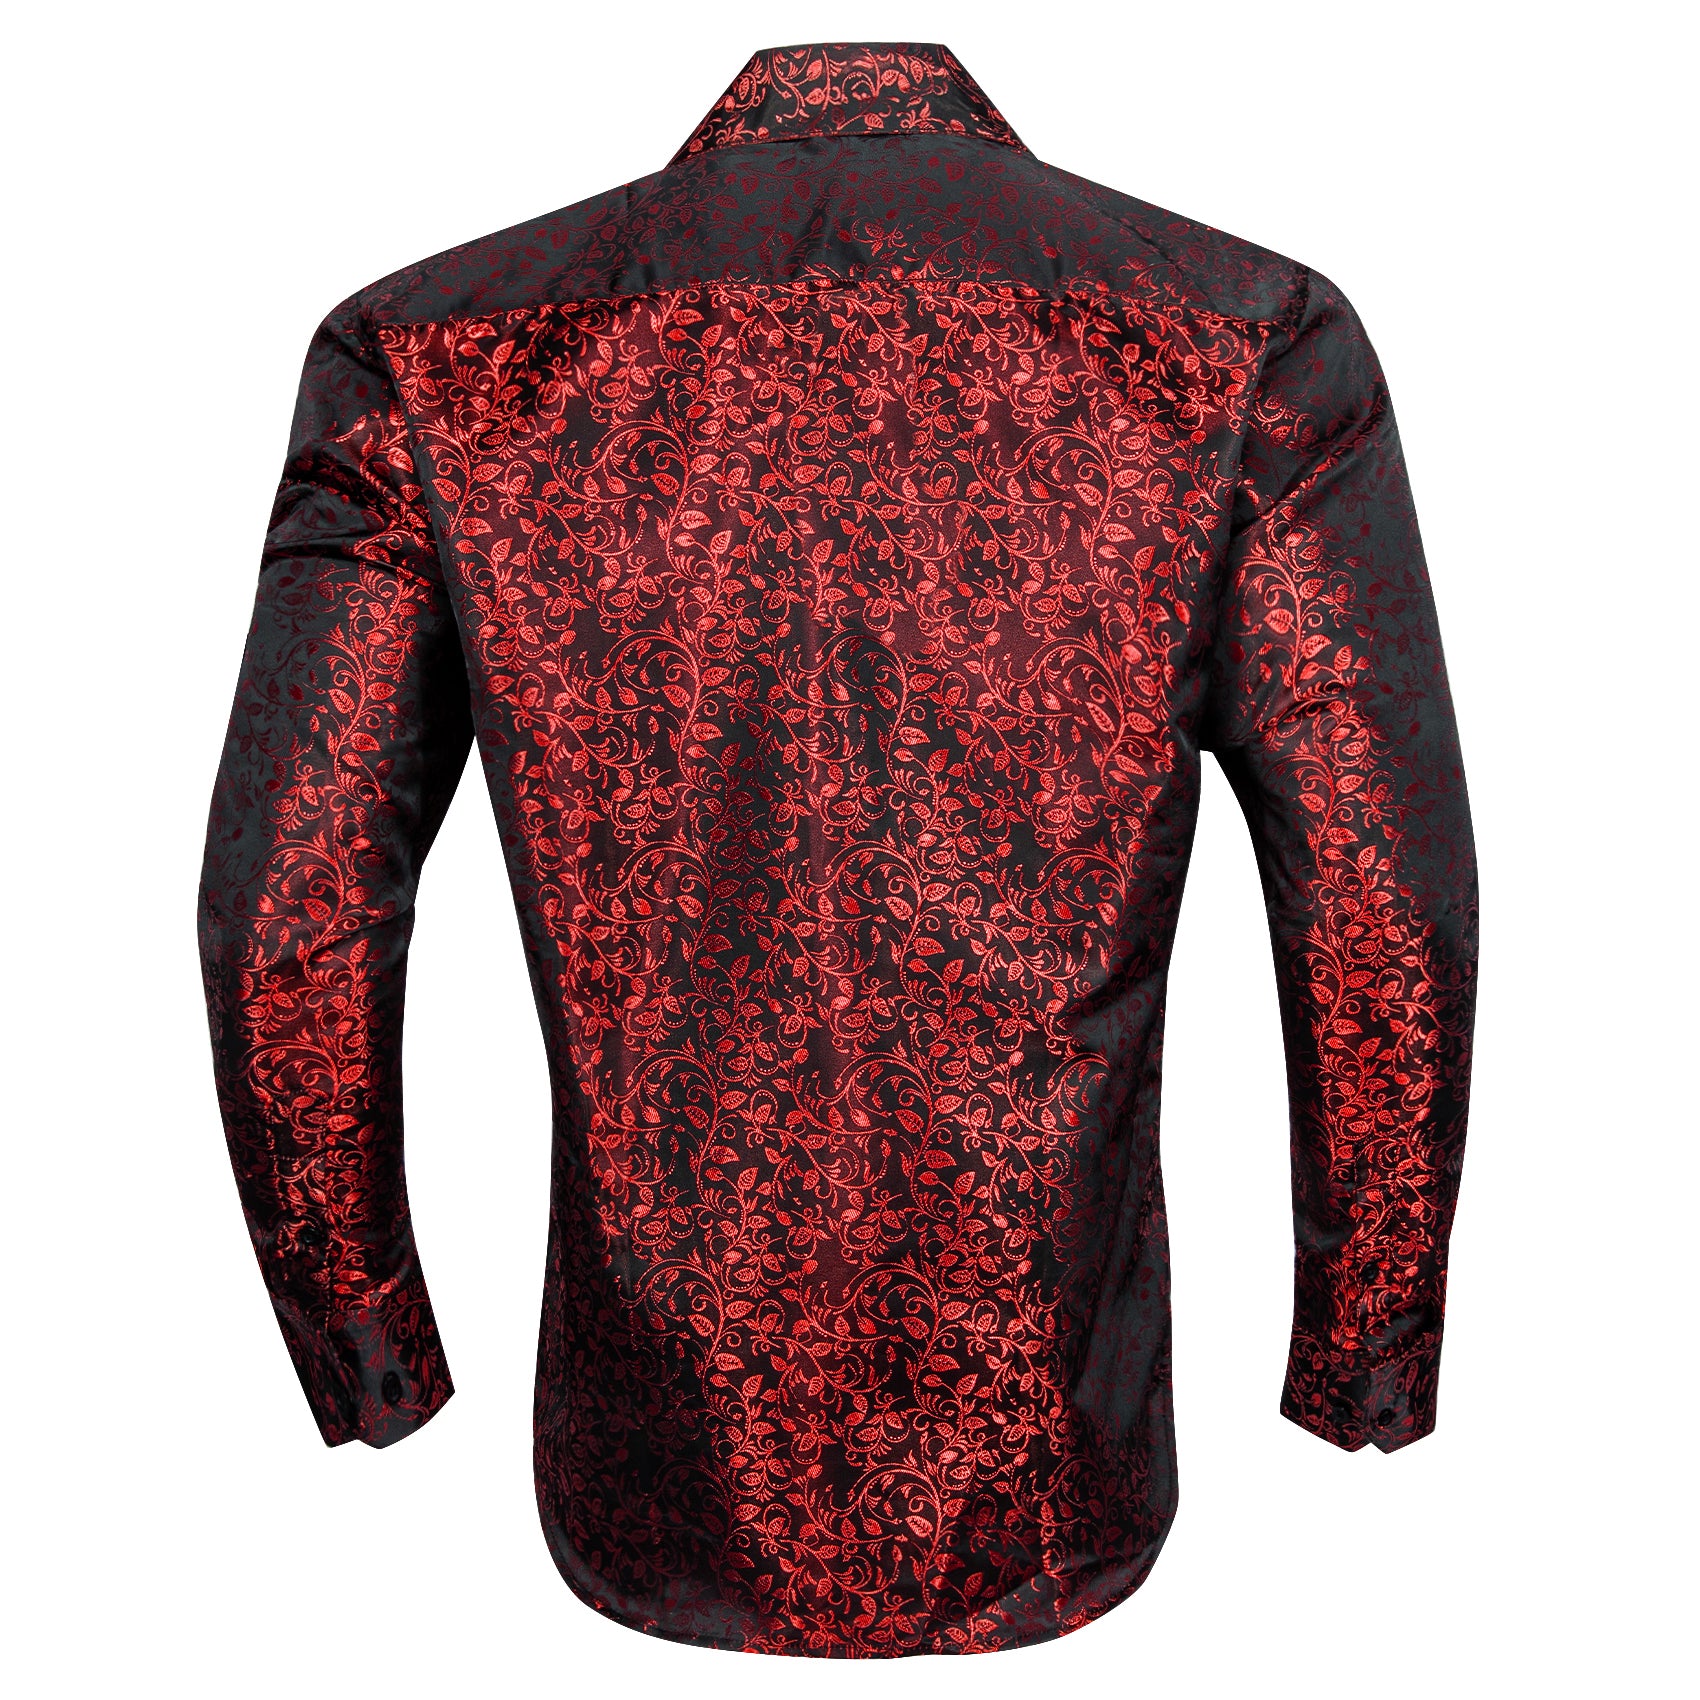 Barry.wang Button Down Shirt Luxury Burgundy Red Leaves Floral Silk Shirt for Men